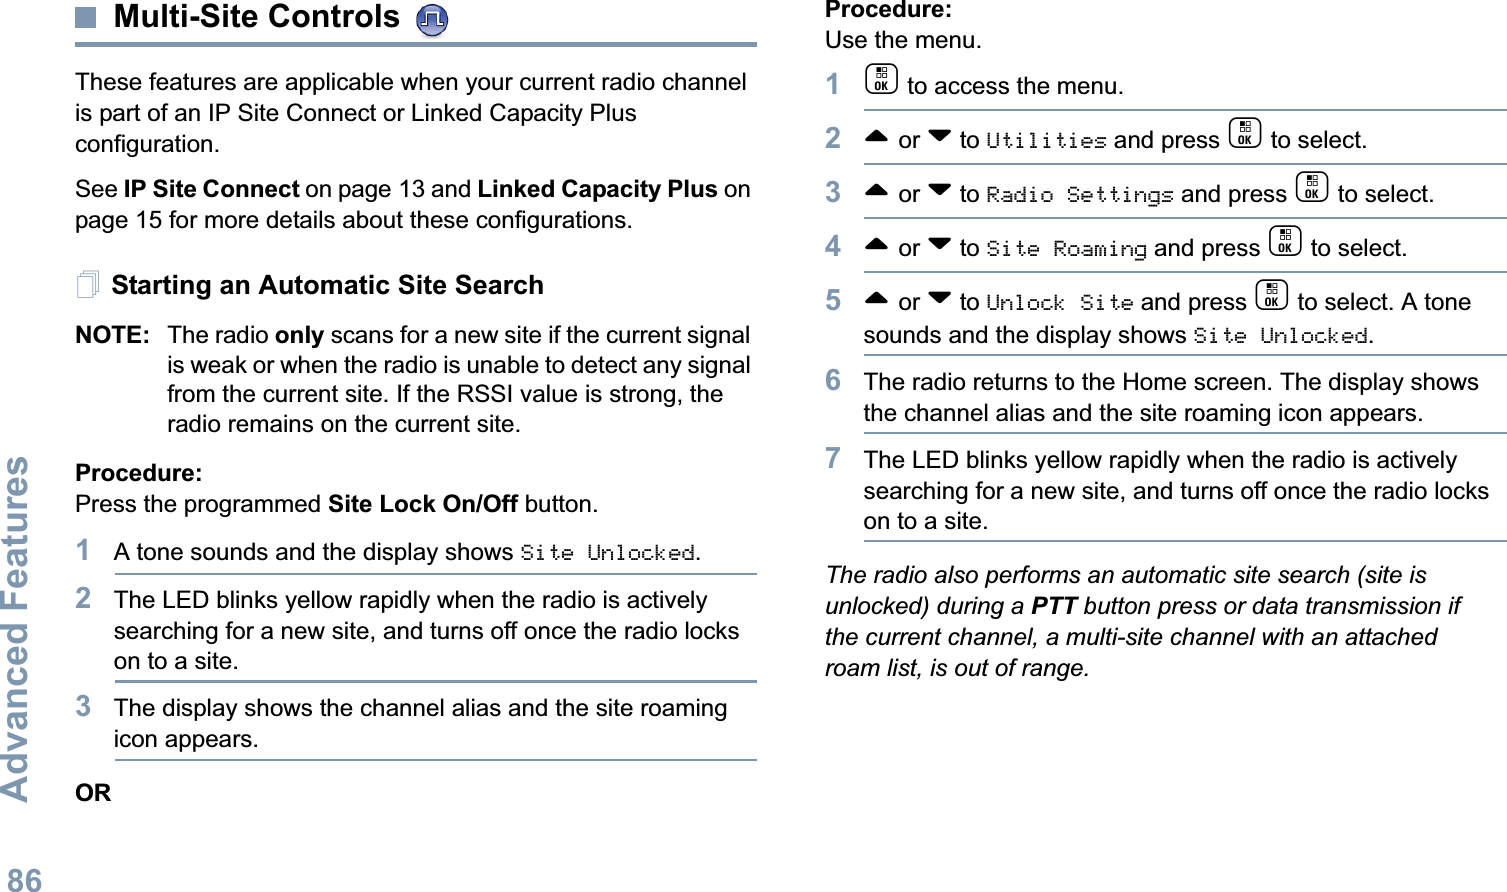 Advanced FeaturesEnglish86Multi-Site Controls These features are applicable when your current radio channel is part of an IP Site Connect or Linked Capacity Plus configuration. See IP Site Connect on page 13 and Linked Capacity Plus on page 15 for more details about these configurations.Starting an Automatic Site SearchNOTE: The radio only scans for a new site if the current signal is weak or when the radio is unable to detect any signal from the current site. If the RSSI value is strong, the radio remains on the current site.Procedure: Press the programmed Site Lock On/Off button.1A tone sounds and the display shows Site Unlocked.2The LED blinks yellow rapidly when the radio is actively searching for a new site, and turns off once the radio locks on to a site.3The display shows the channel alias and the site roaming icon appears.ORProcedure: Use the menu.1c to access the menu.2^ or v to Utilities and press c to select.3^ or v to Radio Settings and press c to select.4^ or v to Site Roaming and press c to select.5^ or v to Unlock Site and press c to select. A tone sounds and the display shows Site Unlocked.6The radio returns to the Home screen. The display shows the channel alias and the site roaming icon appears.7The LED blinks yellow rapidly when the radio is actively searching for a new site, and turns off once the radio locks on to a site.The radio also performs an automatic site search (site is unlocked) during a PTT button press or data transmission if the current channel, a multi-site channel with an attached roam list, is out of range.